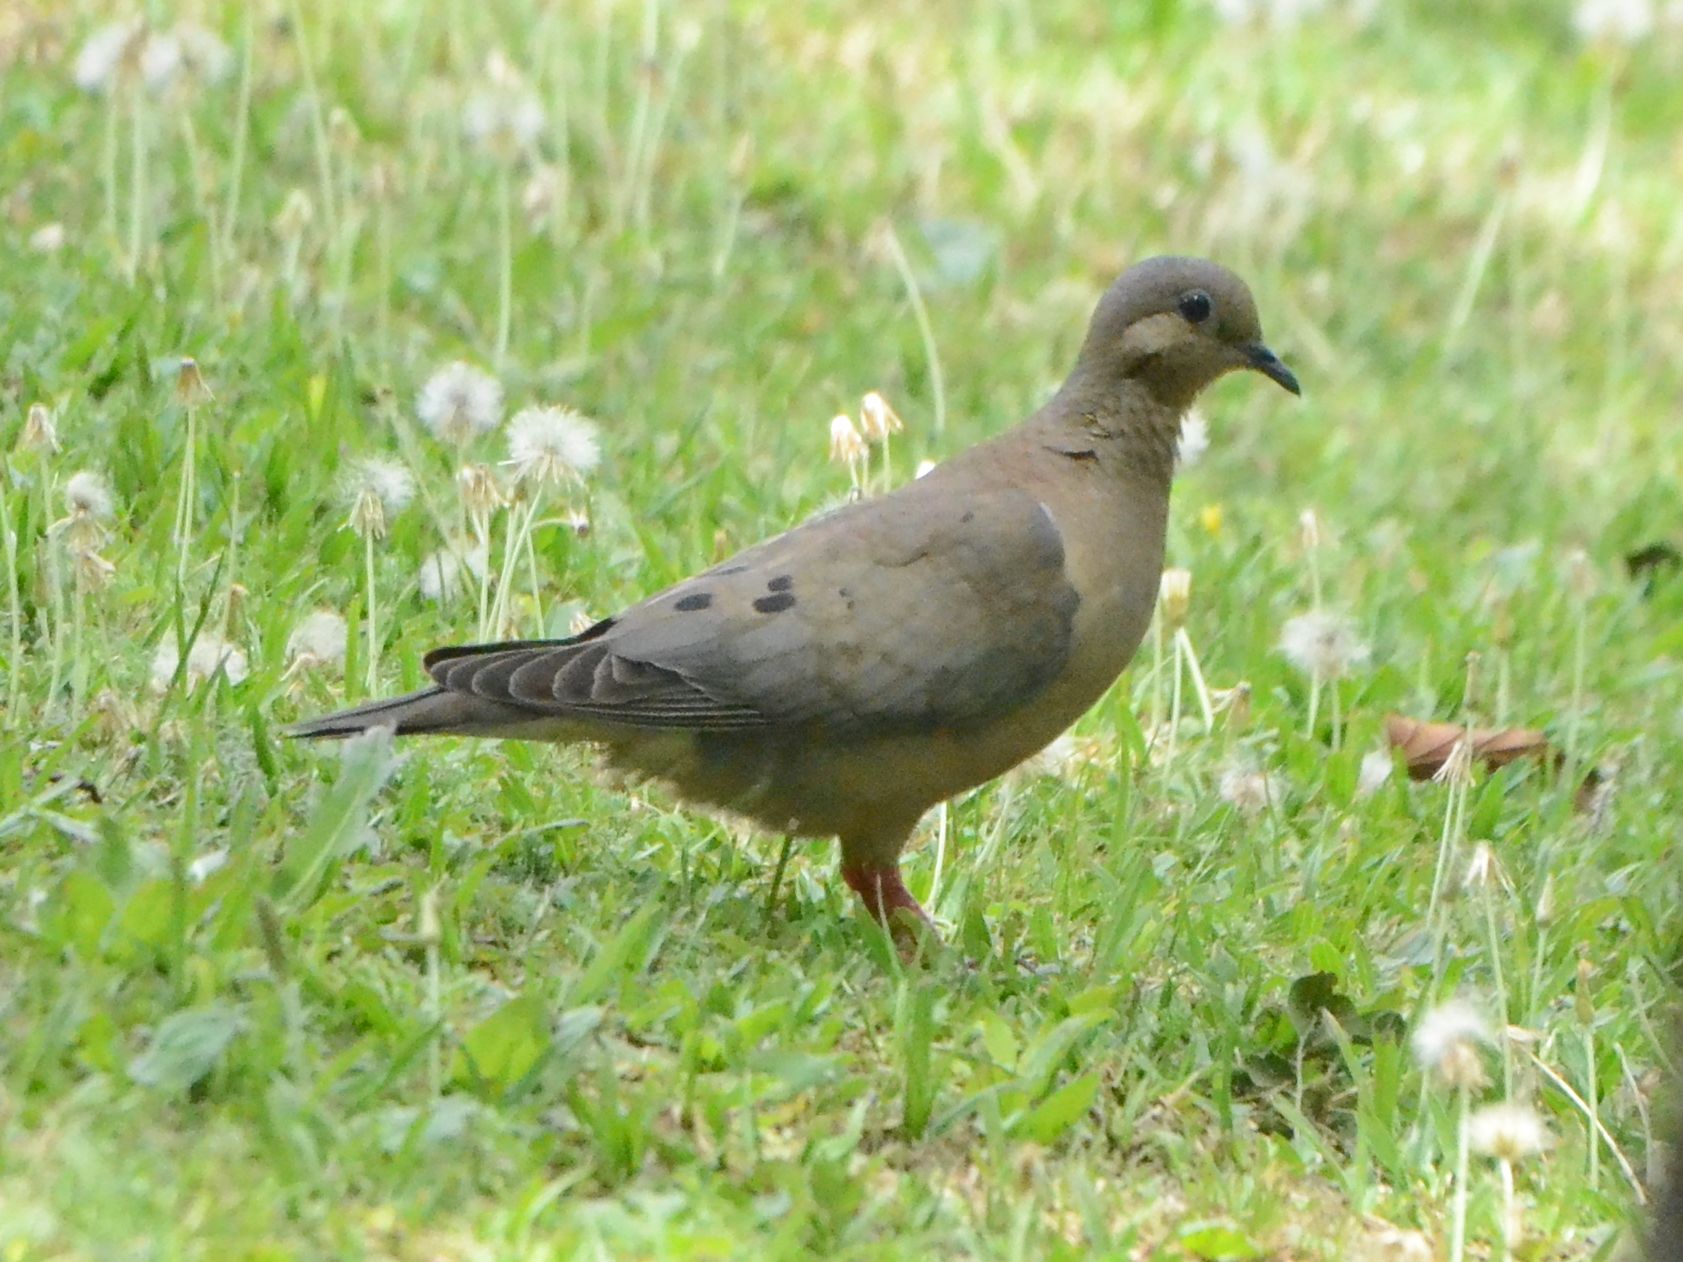 Click picture to see more Eared Doves.